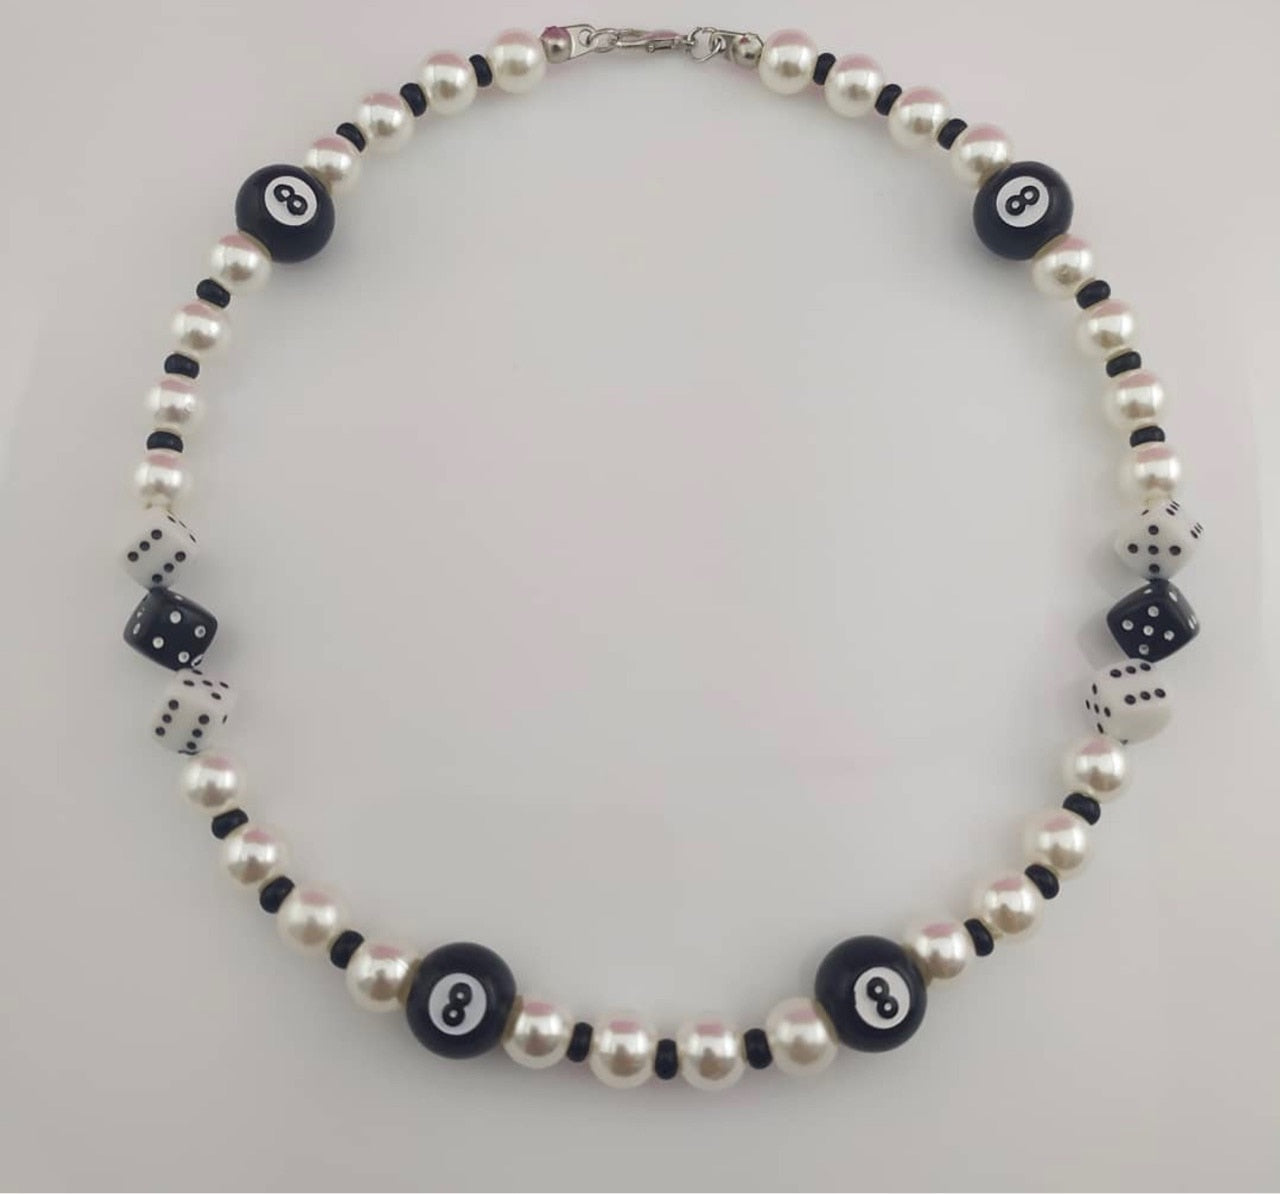 Black 8 Ball and Dice Necklace